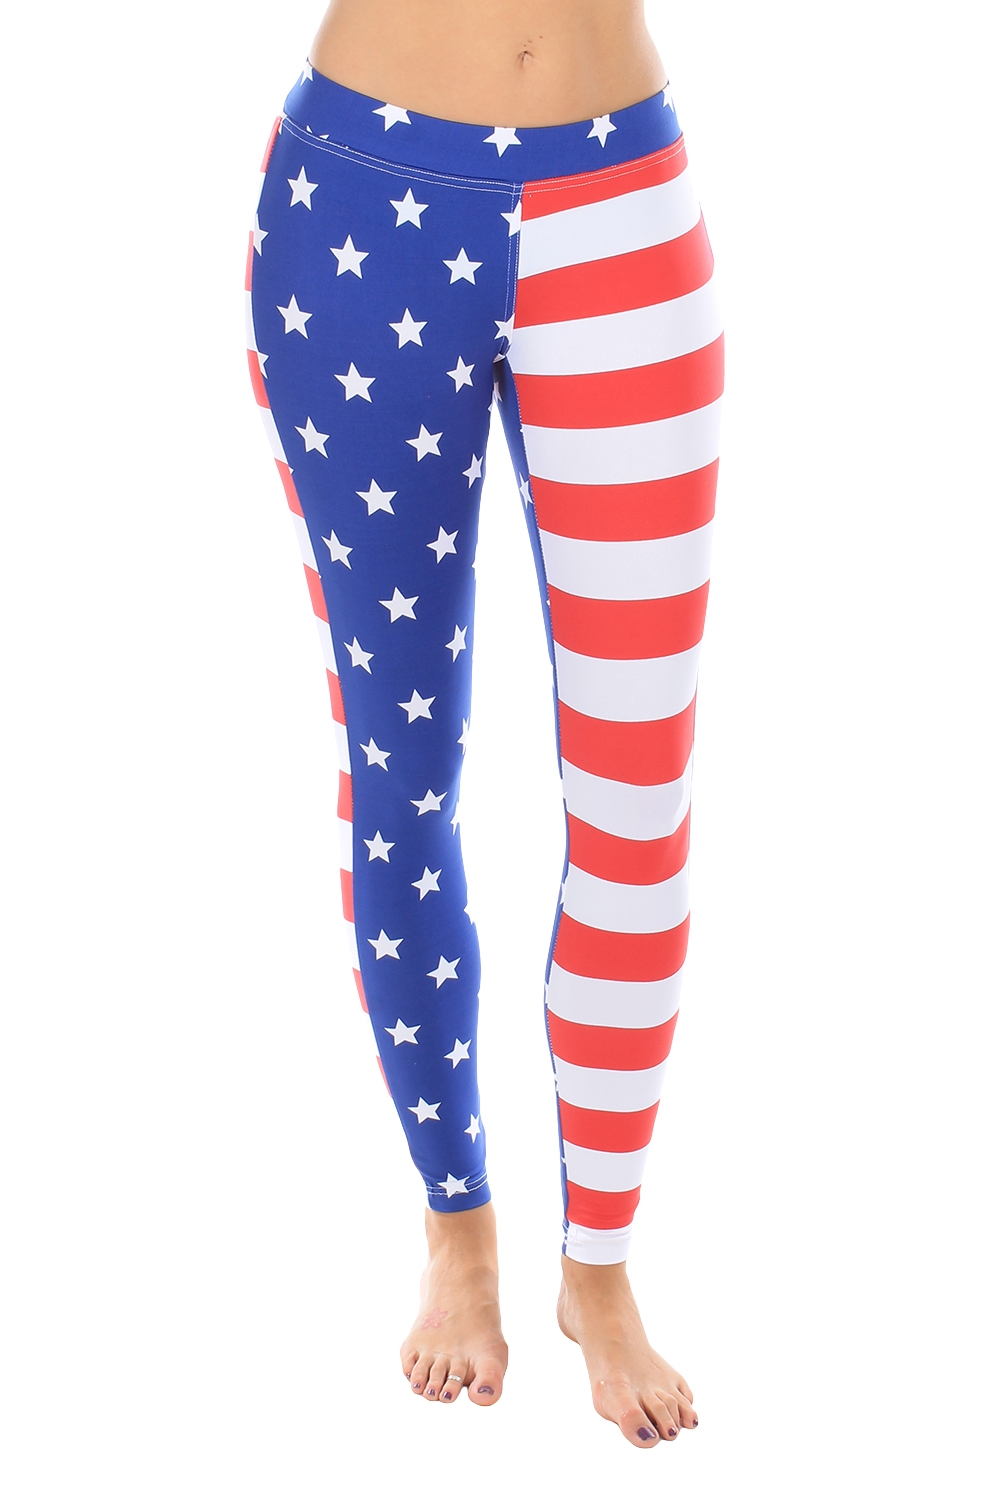 Show off your American pride with fun fashions from Tipsy Elves